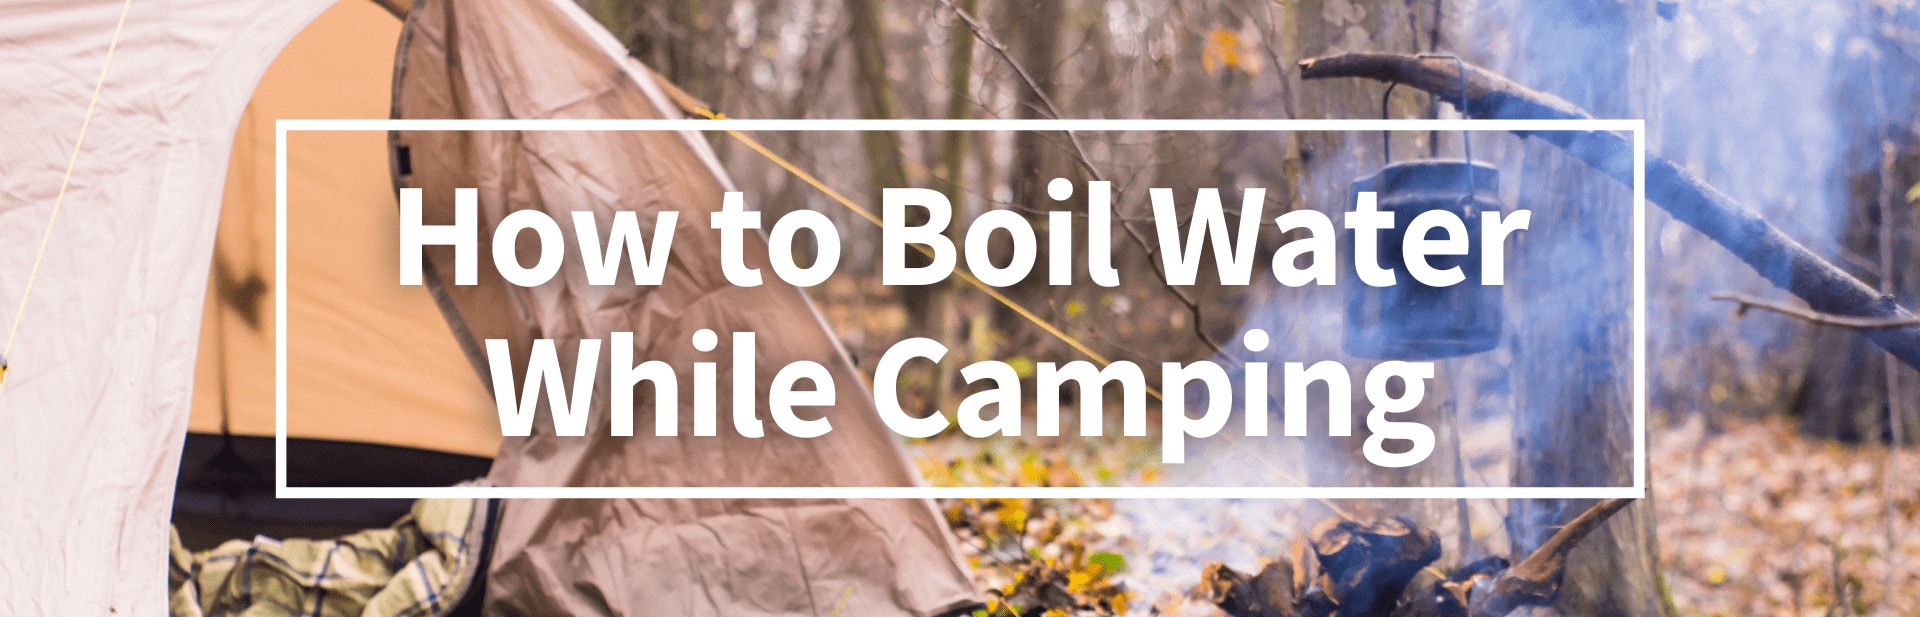 How to Boil Water While Camping: 13 Reliable Methods To Try